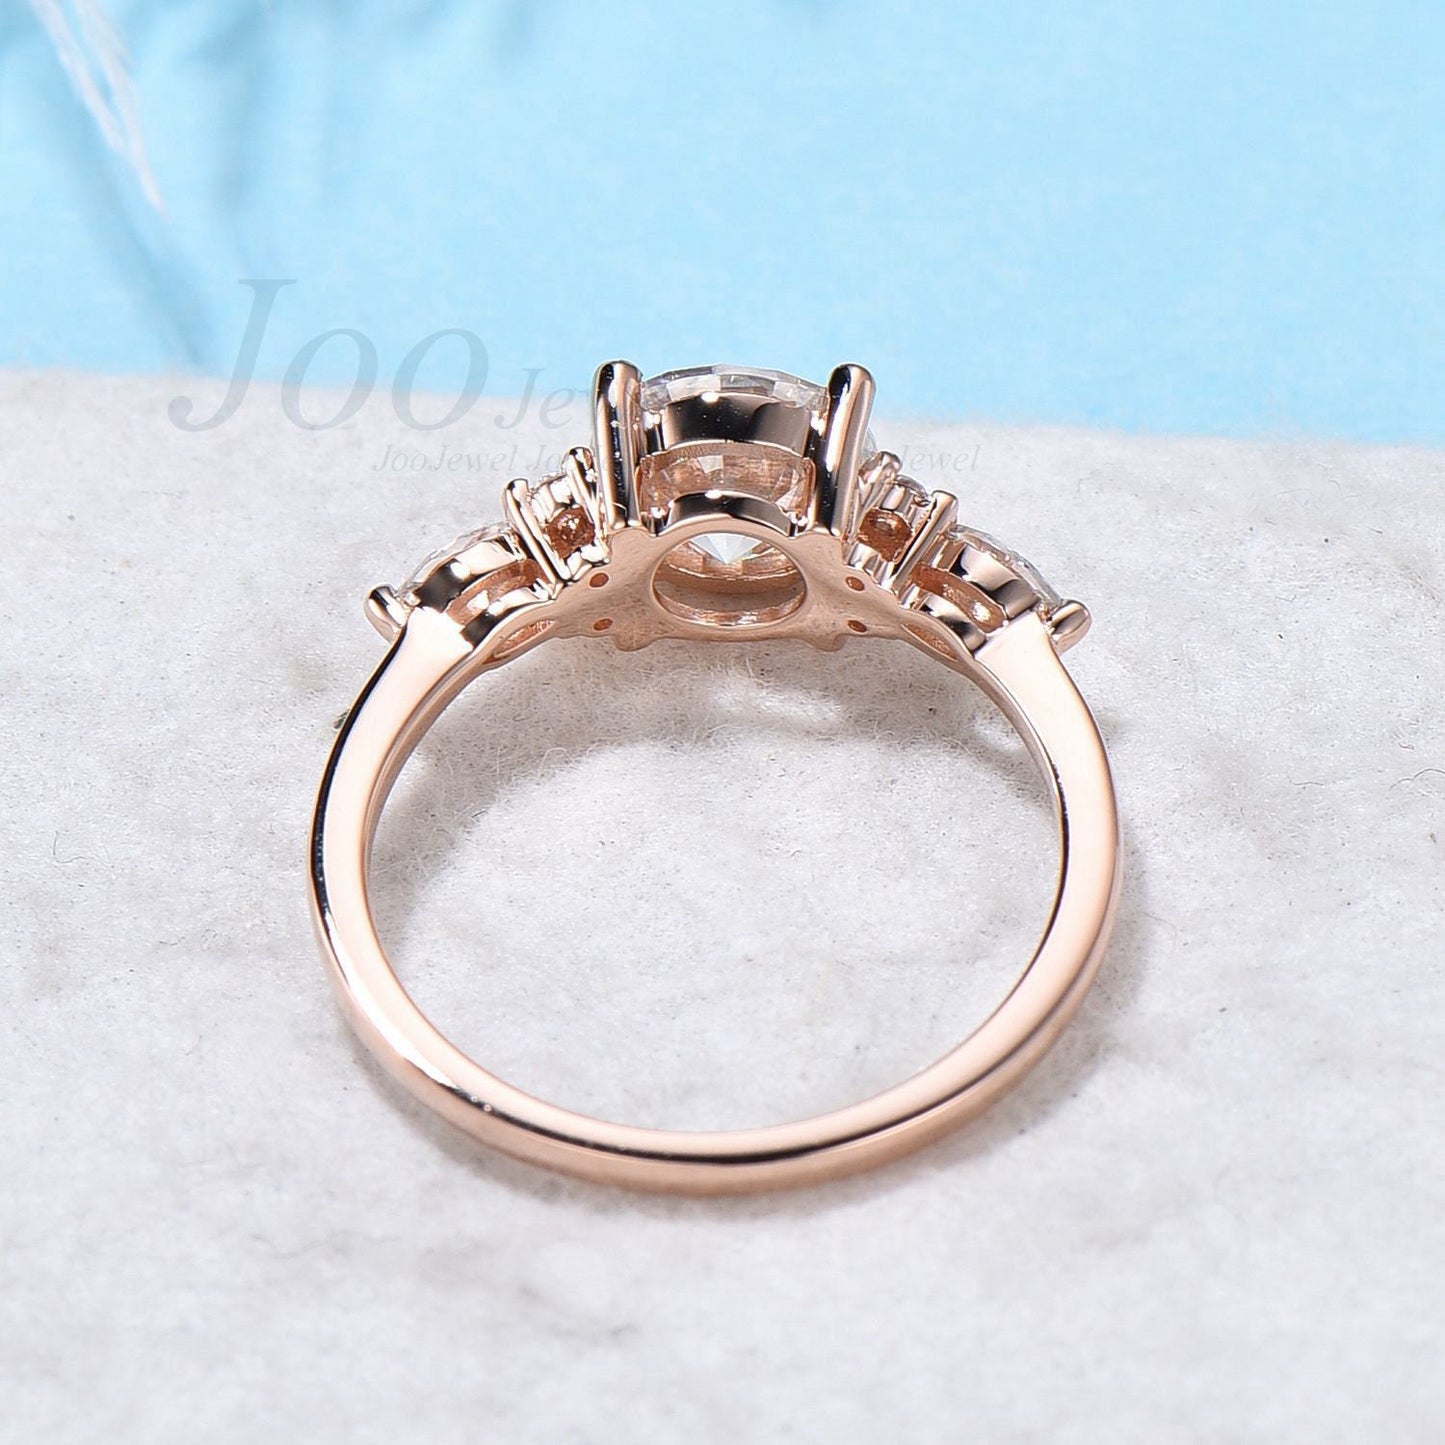 7MM Round Cut Moissanite Engagement Ring Sterling Silver/Rose Gold Simple Moissanite Promise Ring Round Diamond Wedding Ring Gift for Her